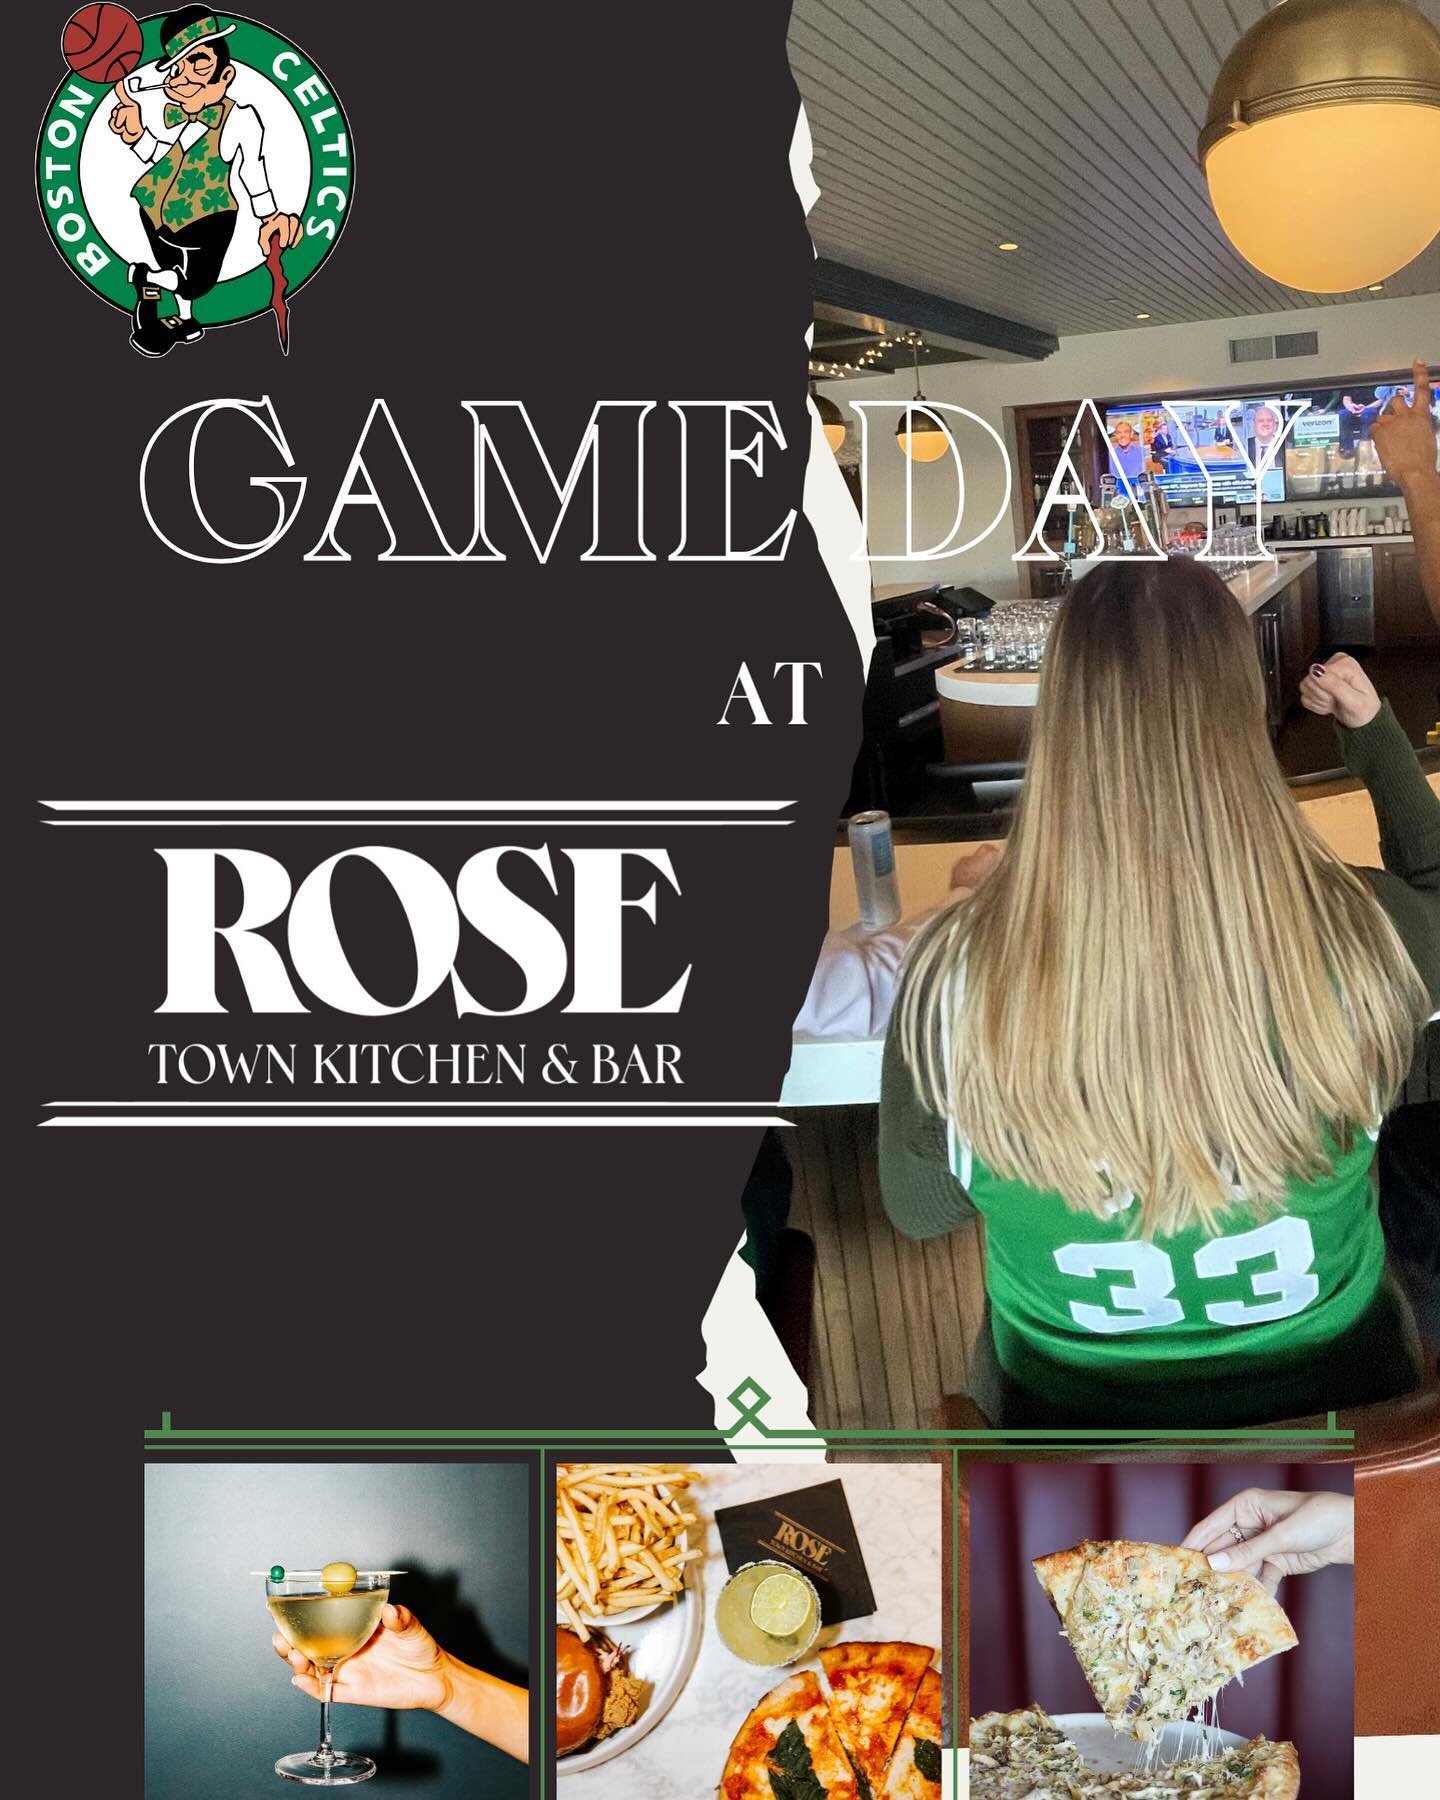 Come cheer on the Celtics at Rose Town Kitchen and Bar! Game days are better with delicious food and craft cocktails.